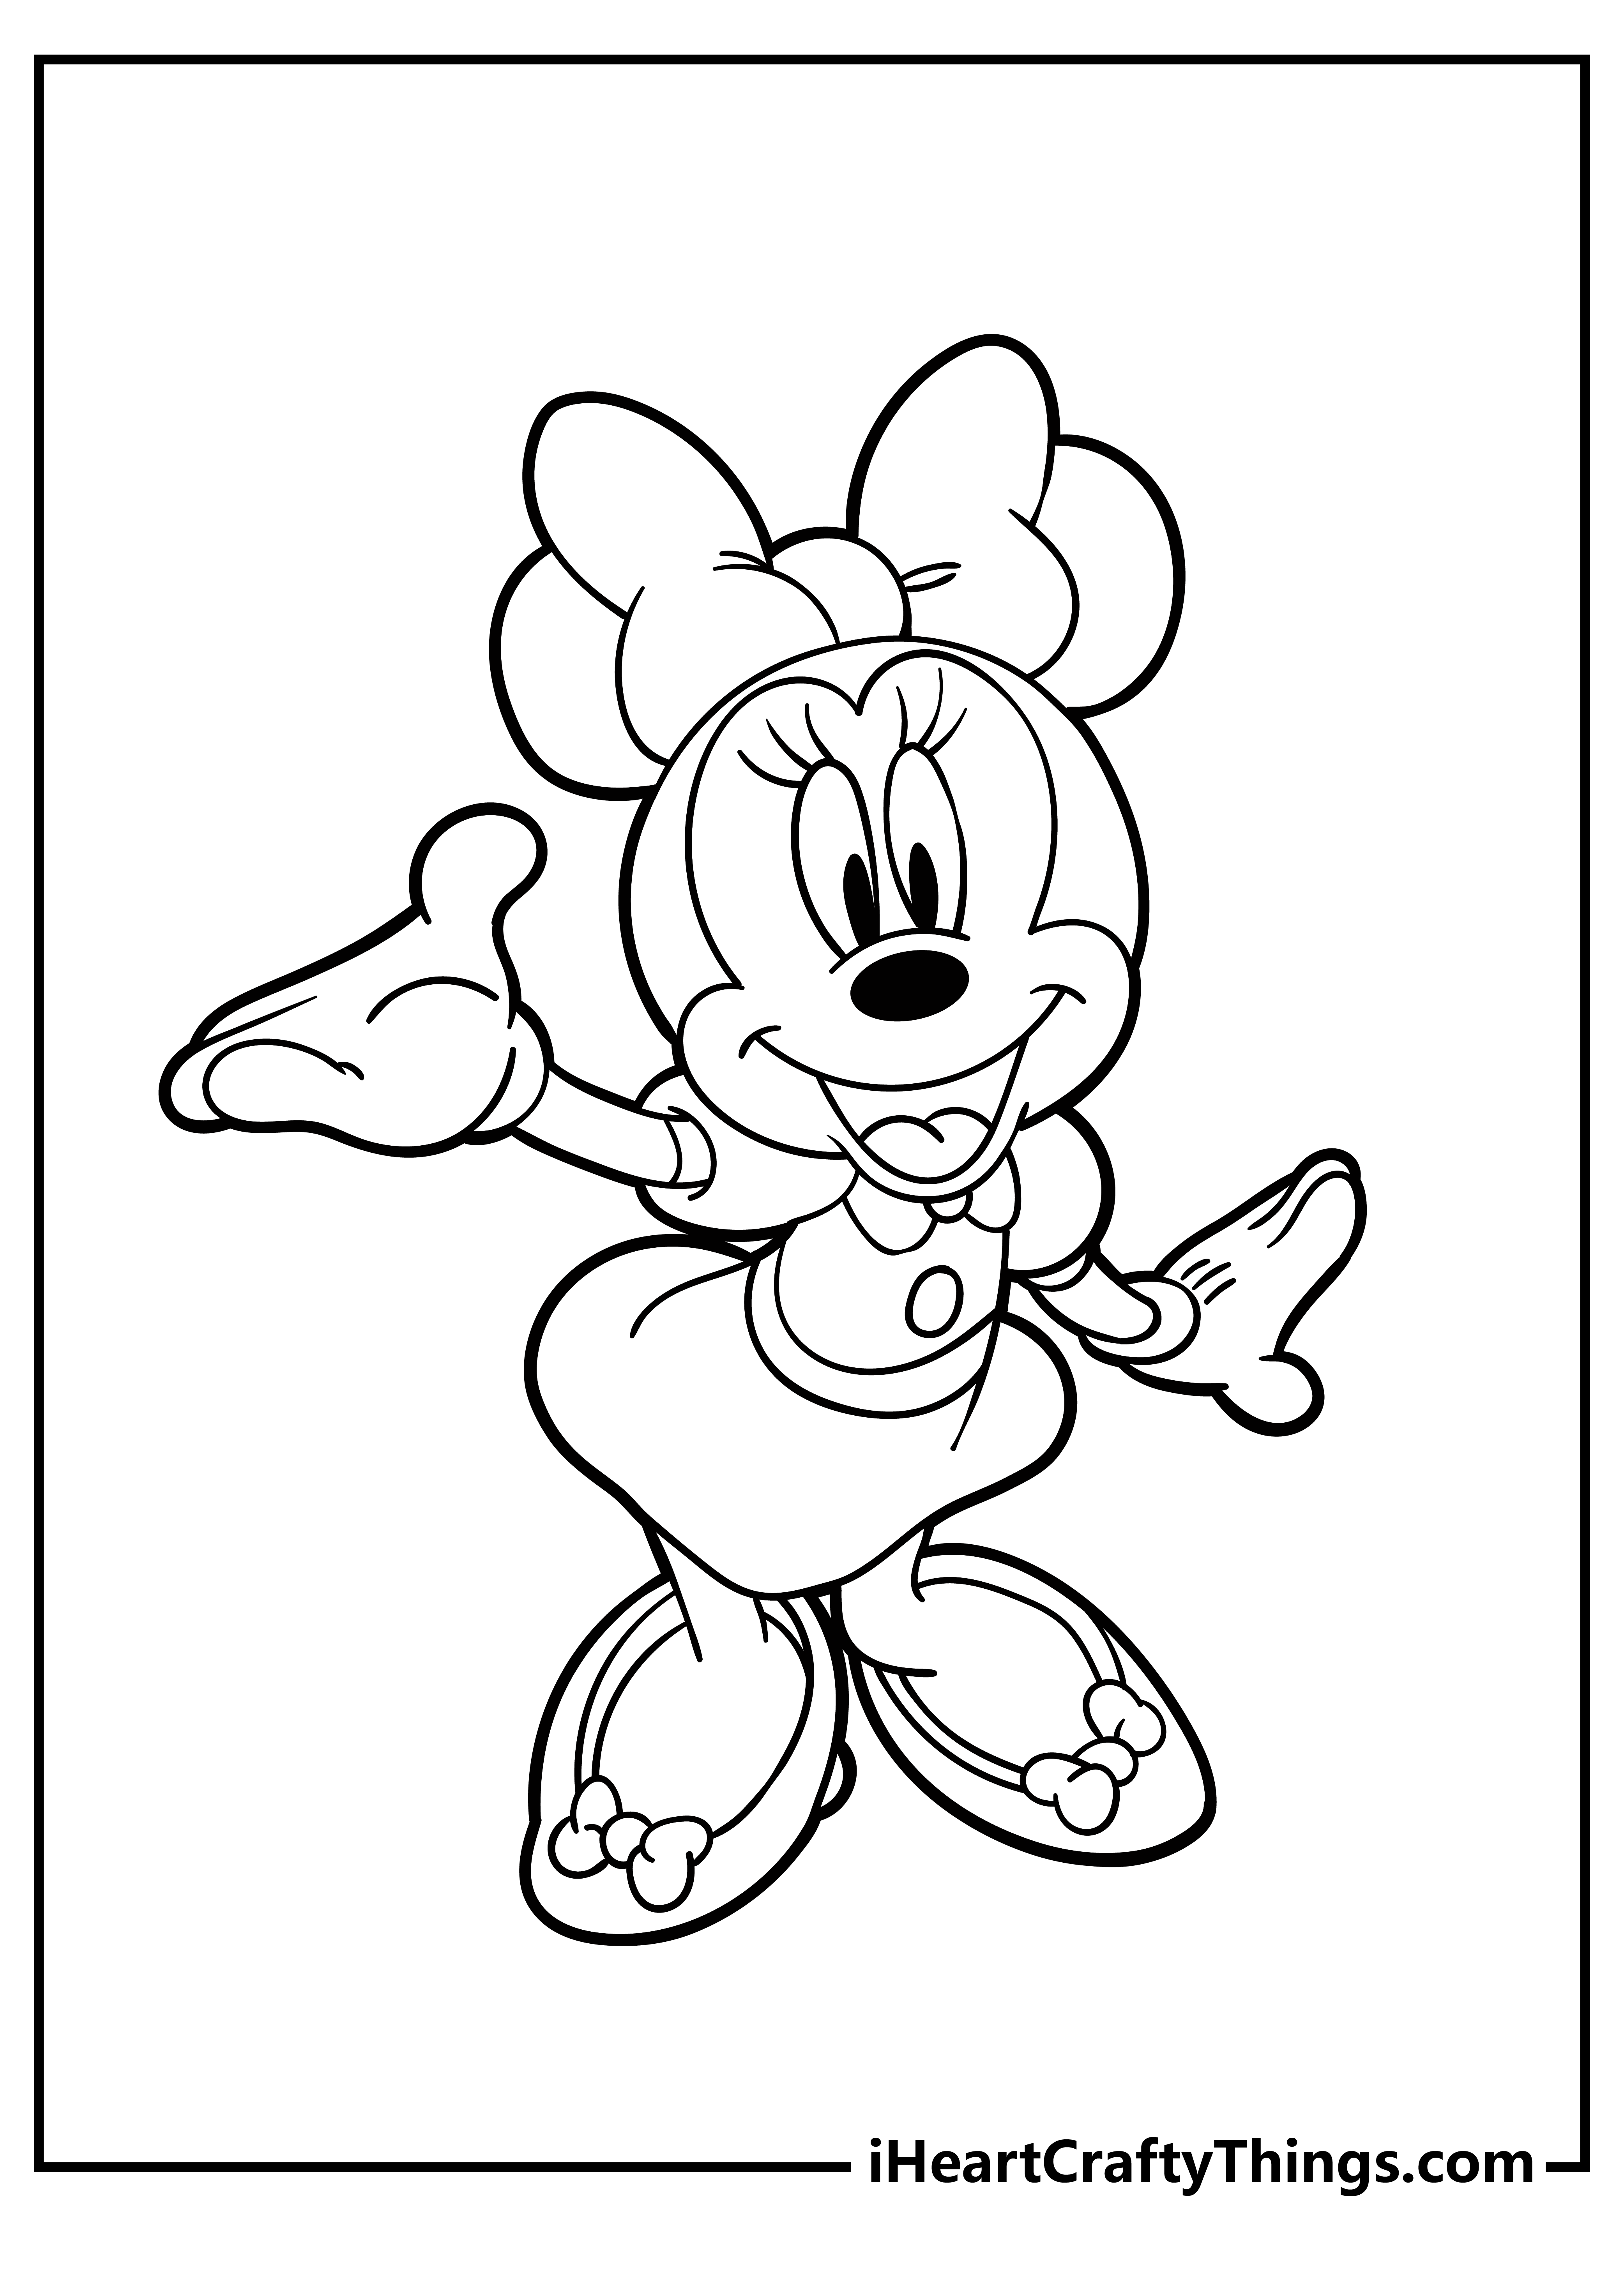 Minnie Mouse Coloring Original Sheet for children free download